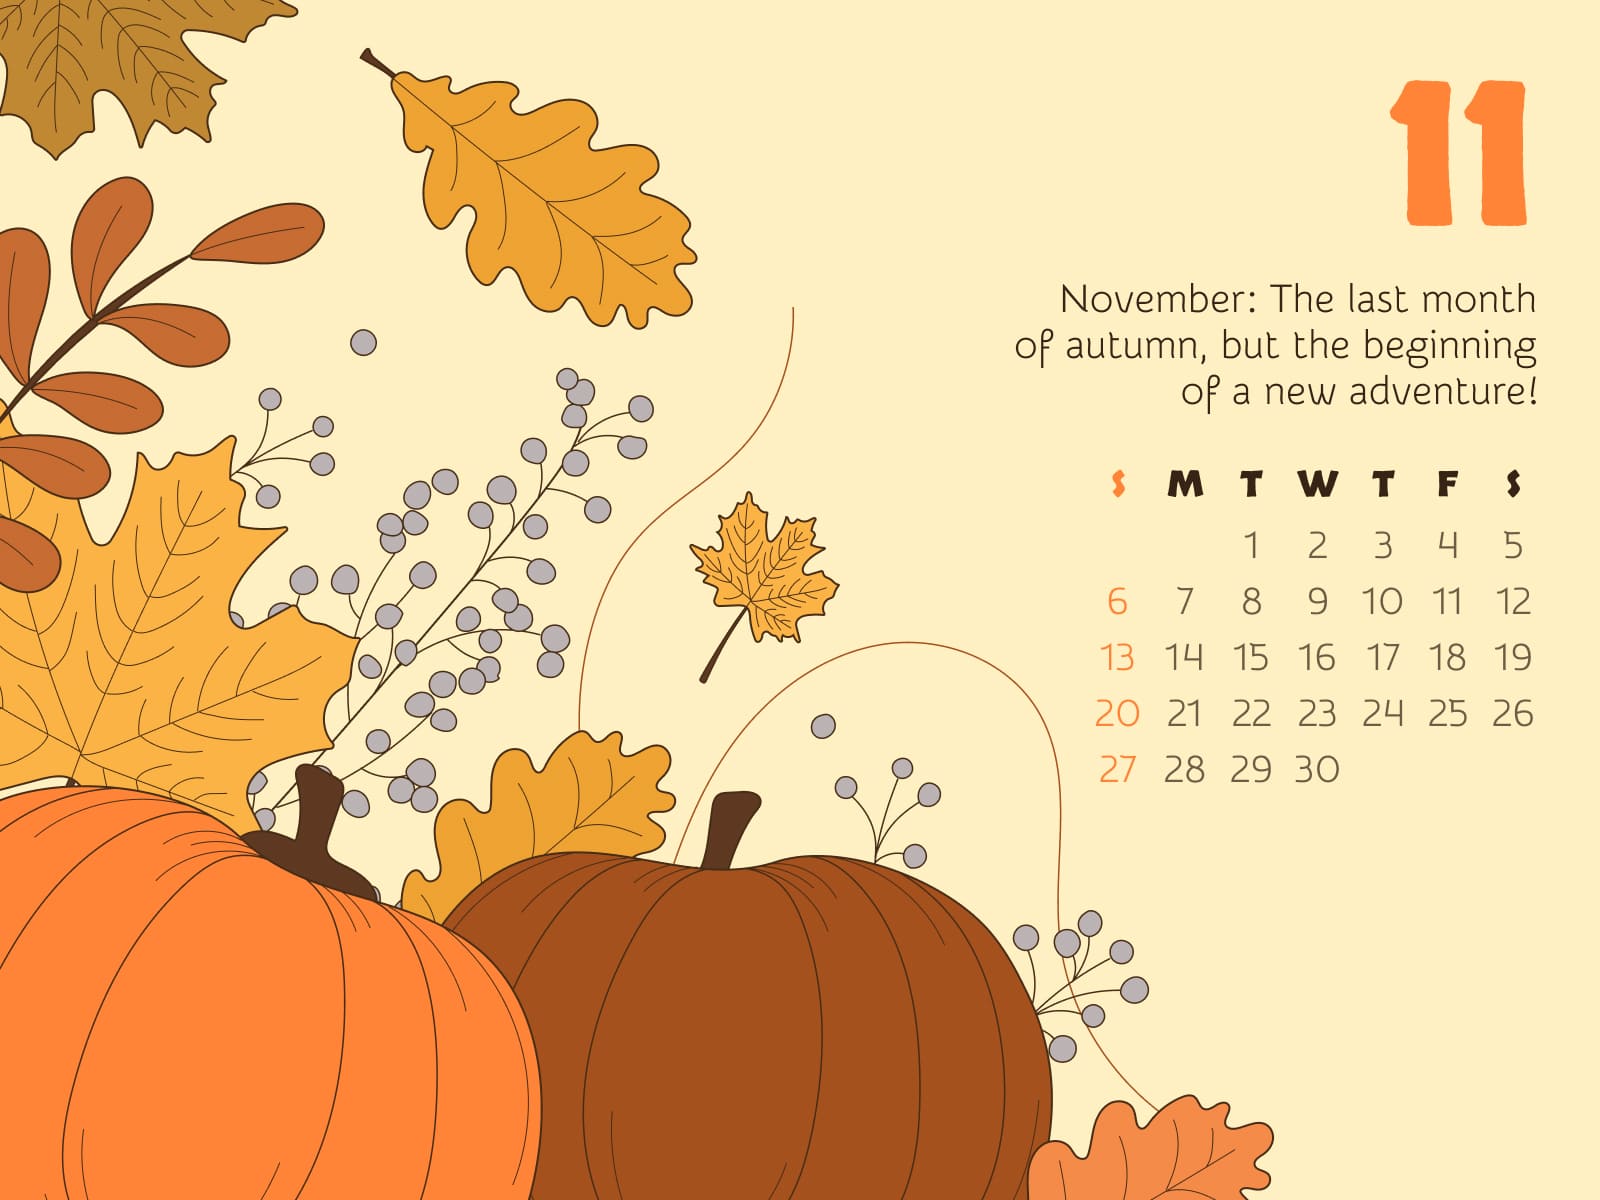 Calendar November in the picture size 1600x1200.